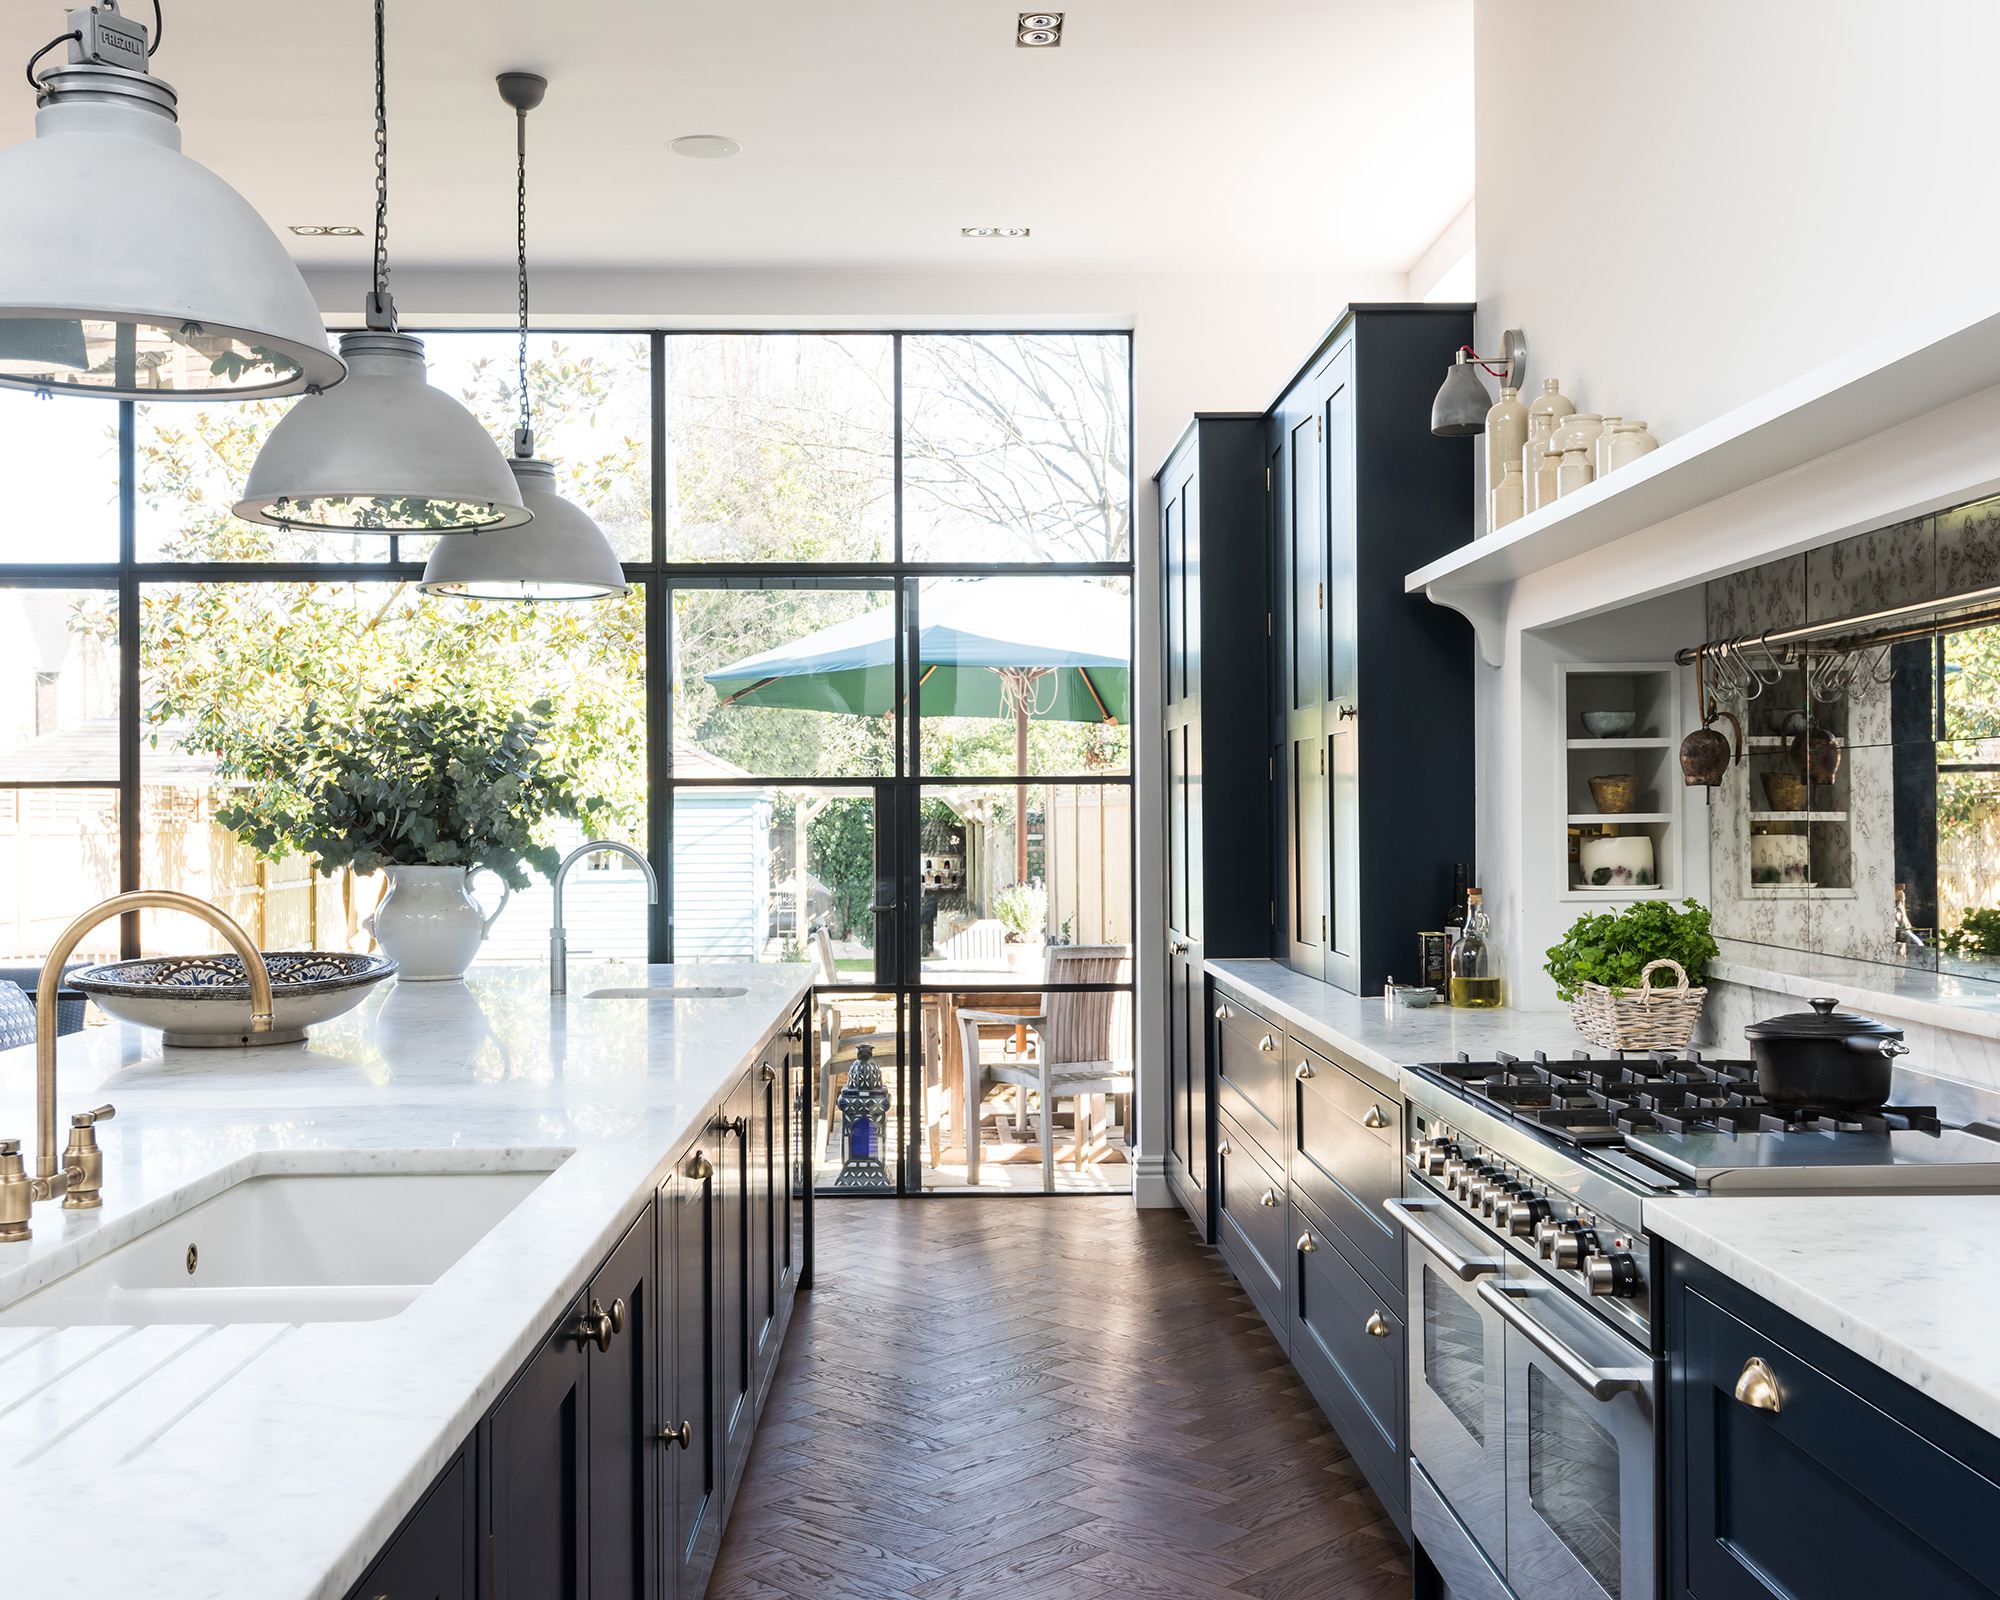 An example of open plan kitchen ideas with large windows, marble counters and dark blue cabinetry.